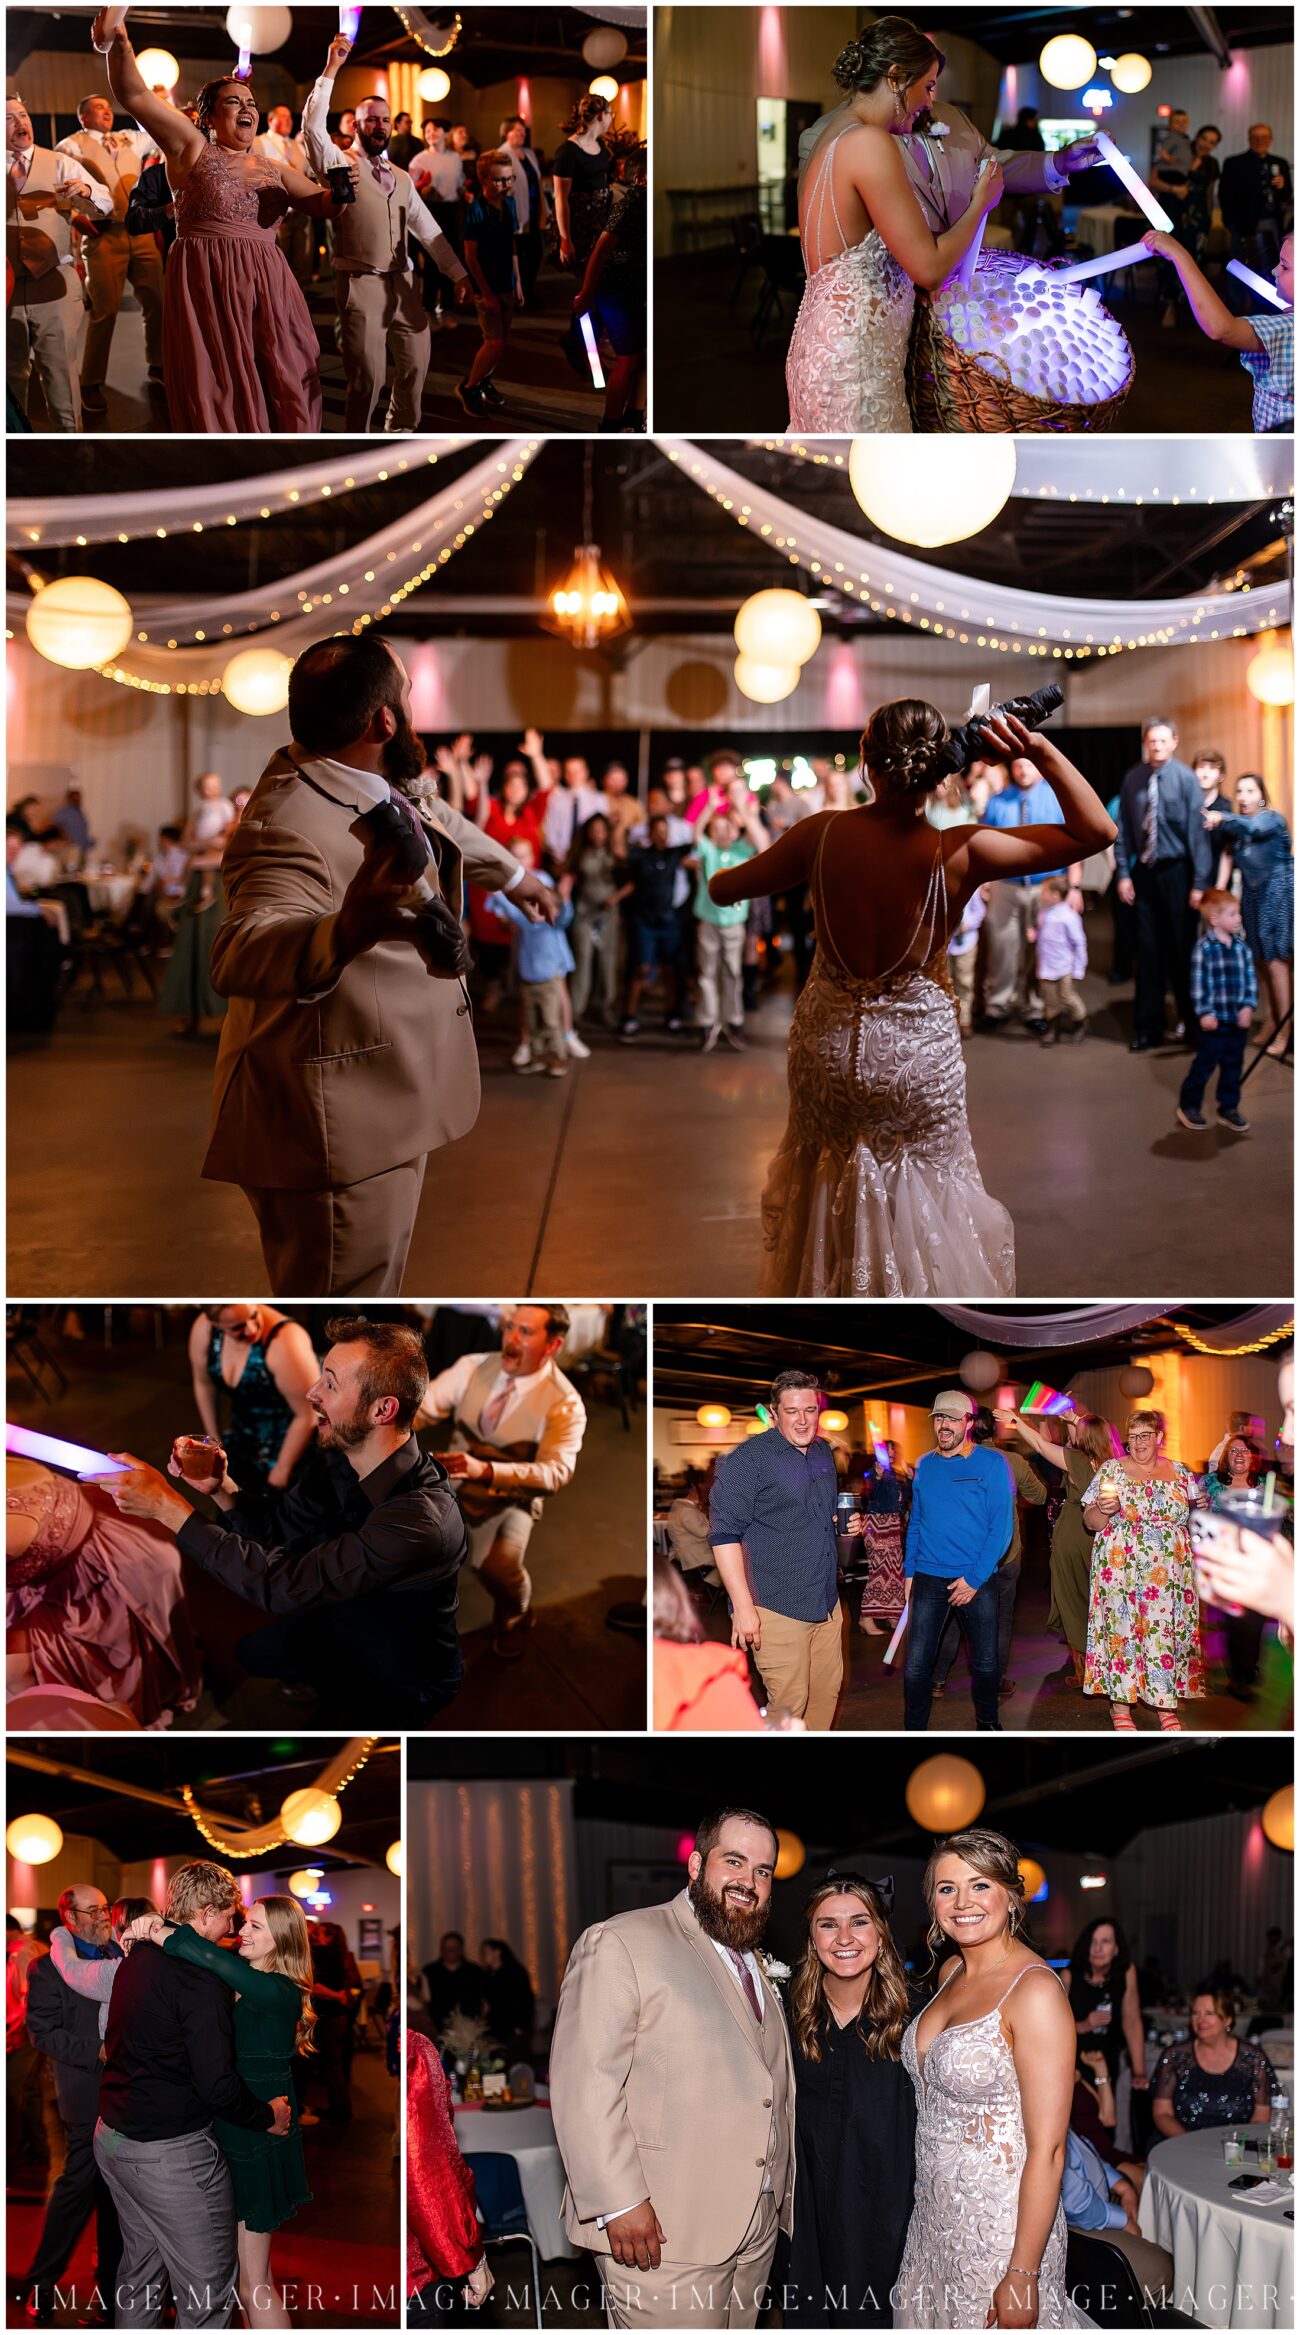 A small town wedding for Casey and Adam. A collage of image from their large wedding reception at the Kankakee County Fairgrounds. All of the party, dancing, and the bride and groom having fun with their guests.

Kankakee County Fairgrounds, Kankakee, IL.

Photo taken by Mager Image Photography.